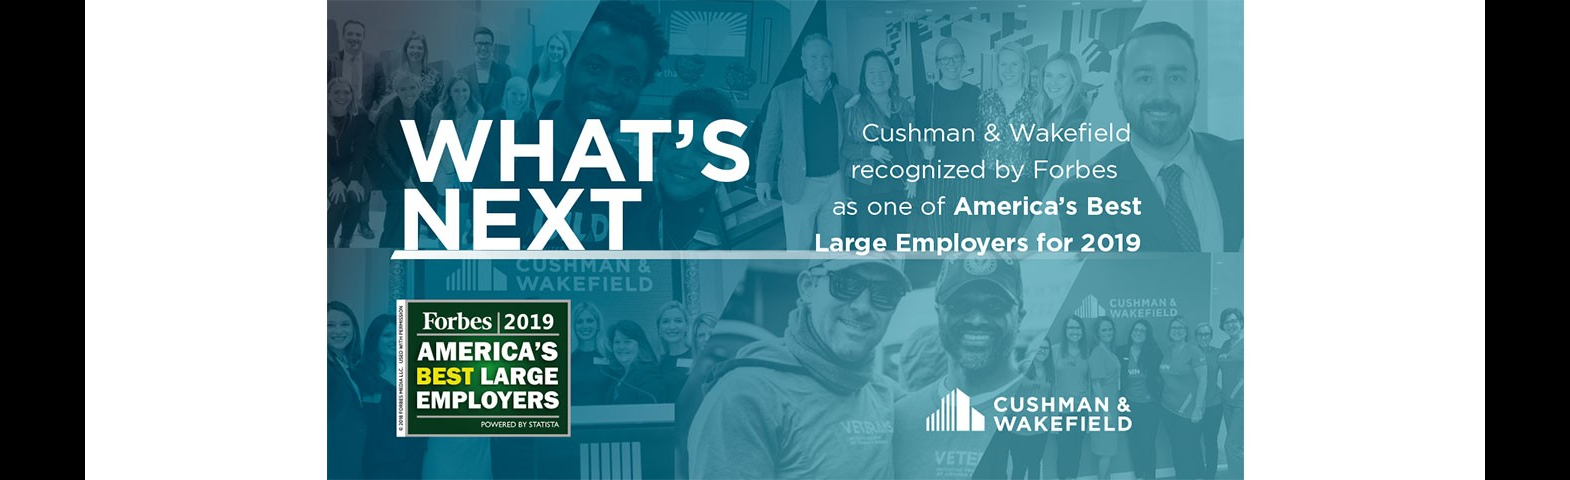 Cushman & Wakefield recognized as a top employer for diversity by Forbes